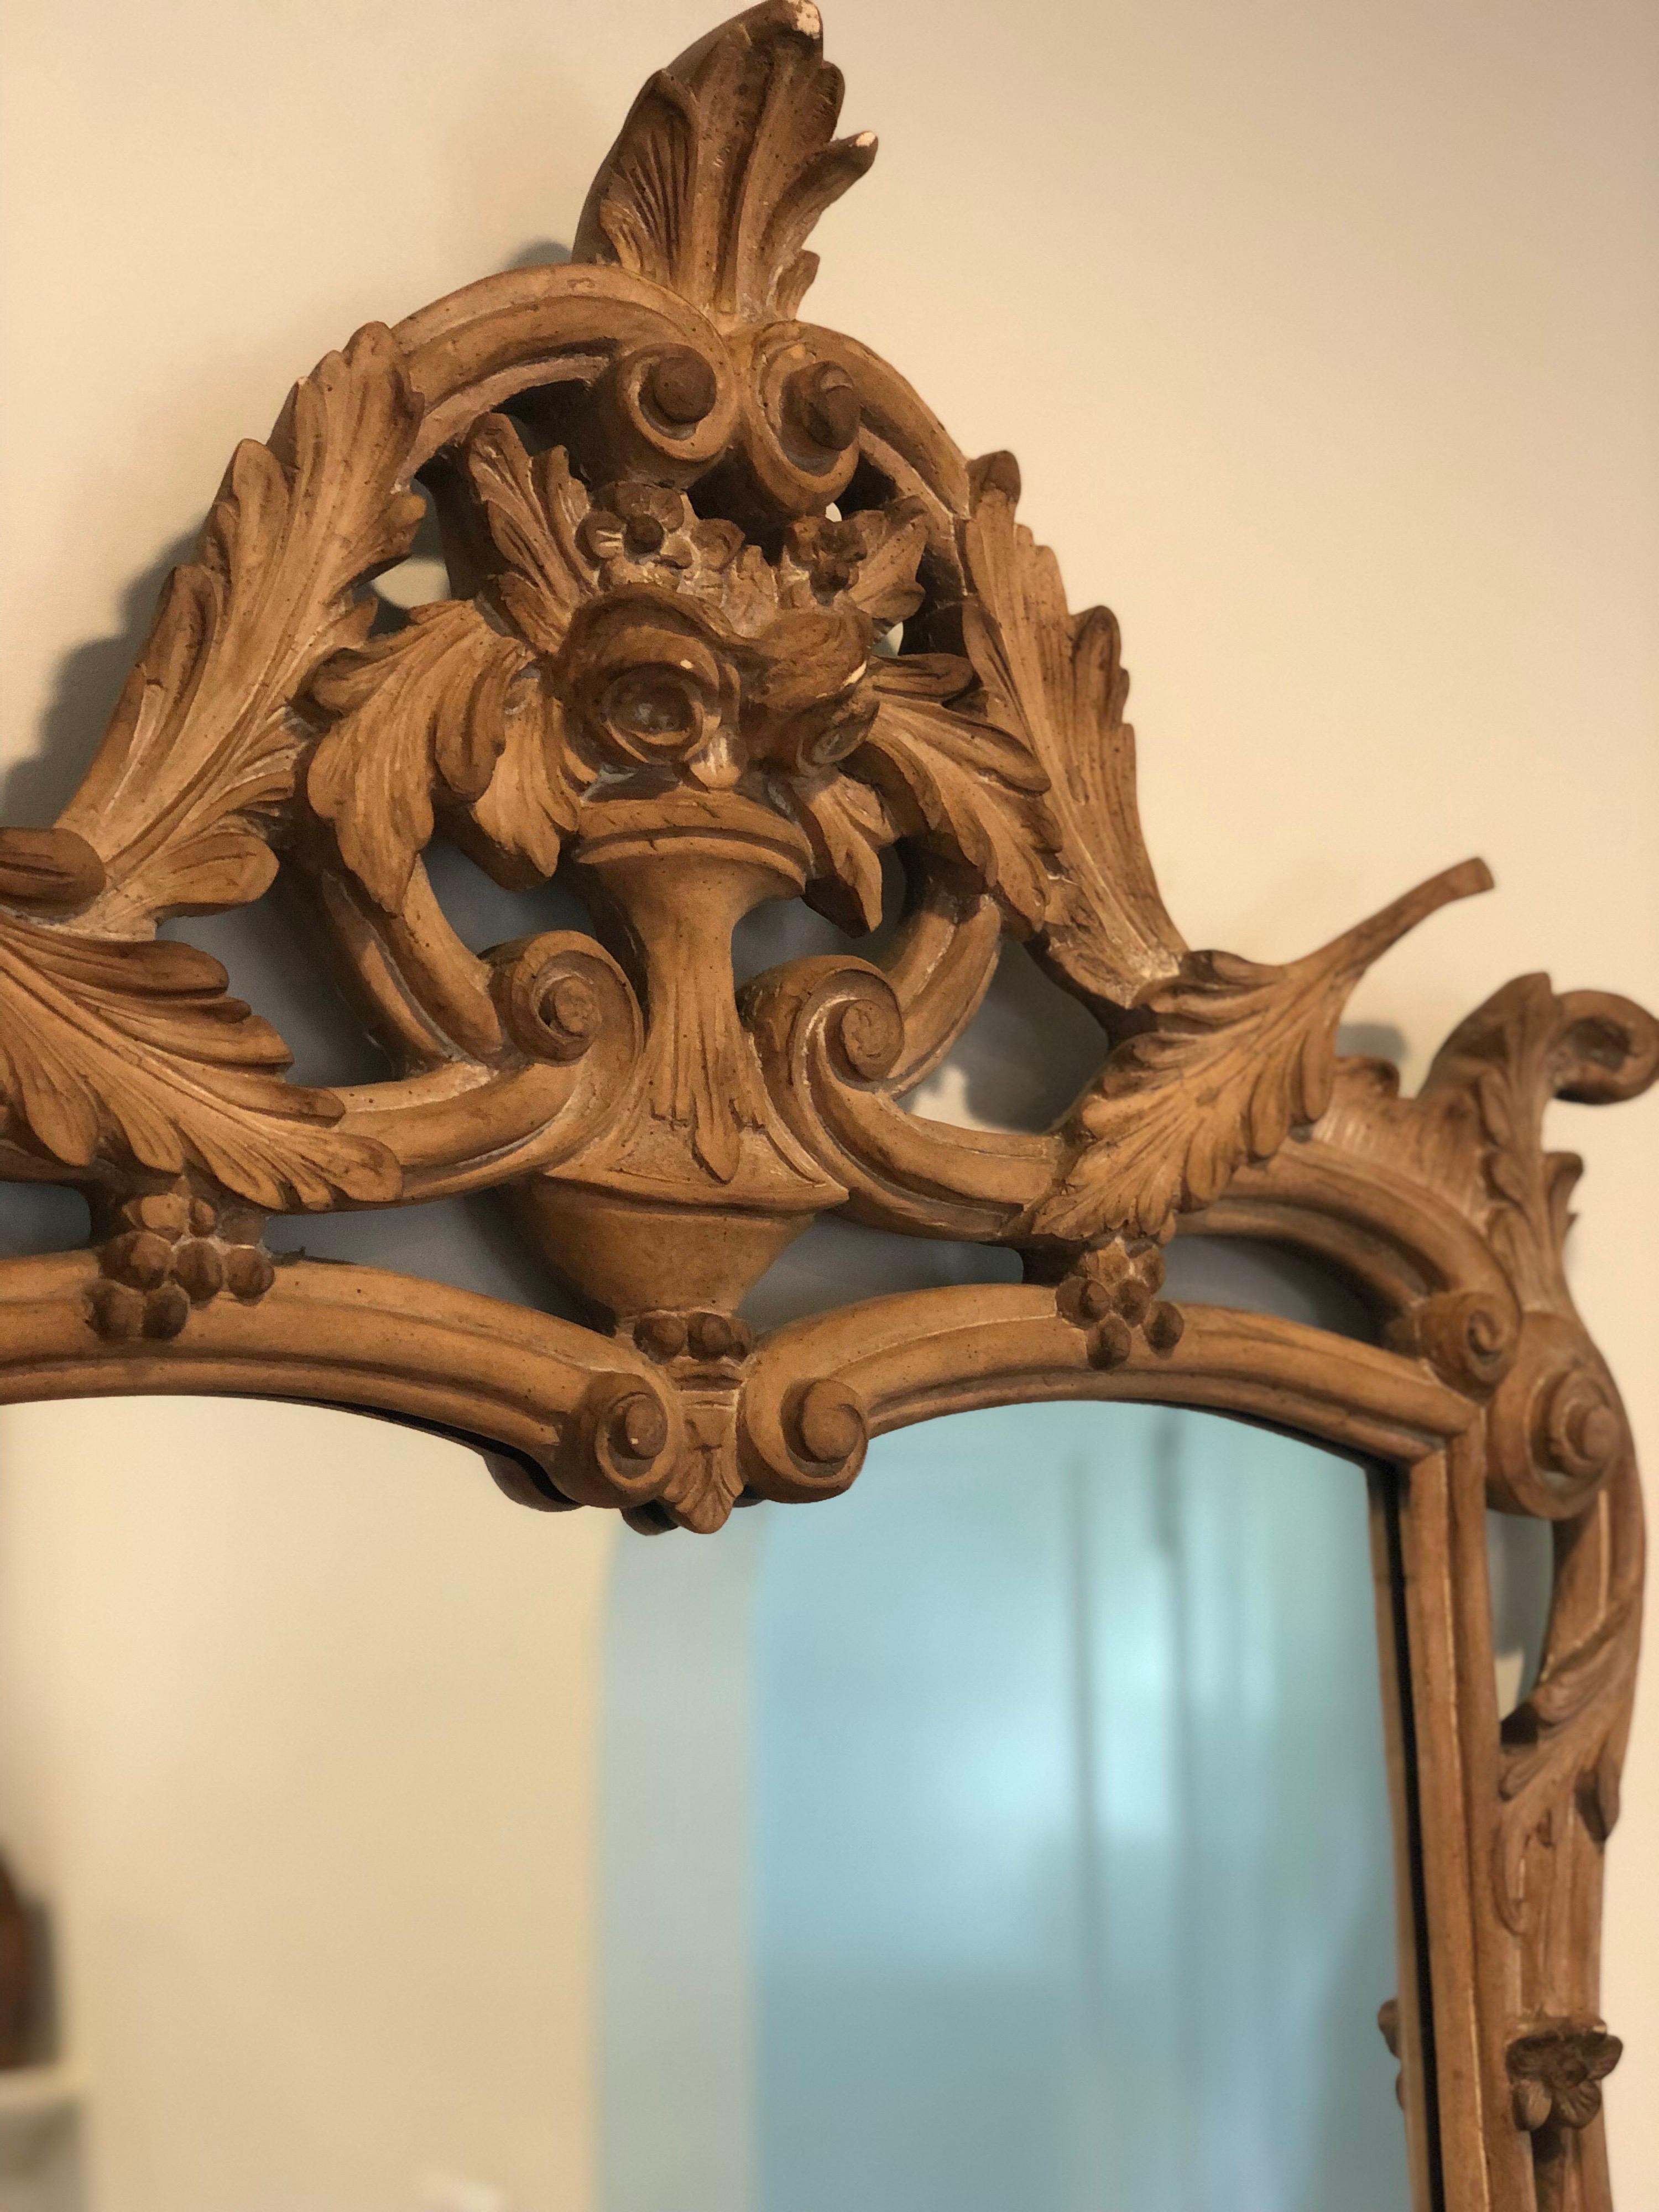 Vintage French style mirror made by Mirror Fair. 
Hand carved with. leaves and flowers in an urn. 

Raw unfinished wood with natural patina gives it a contemporary flare.